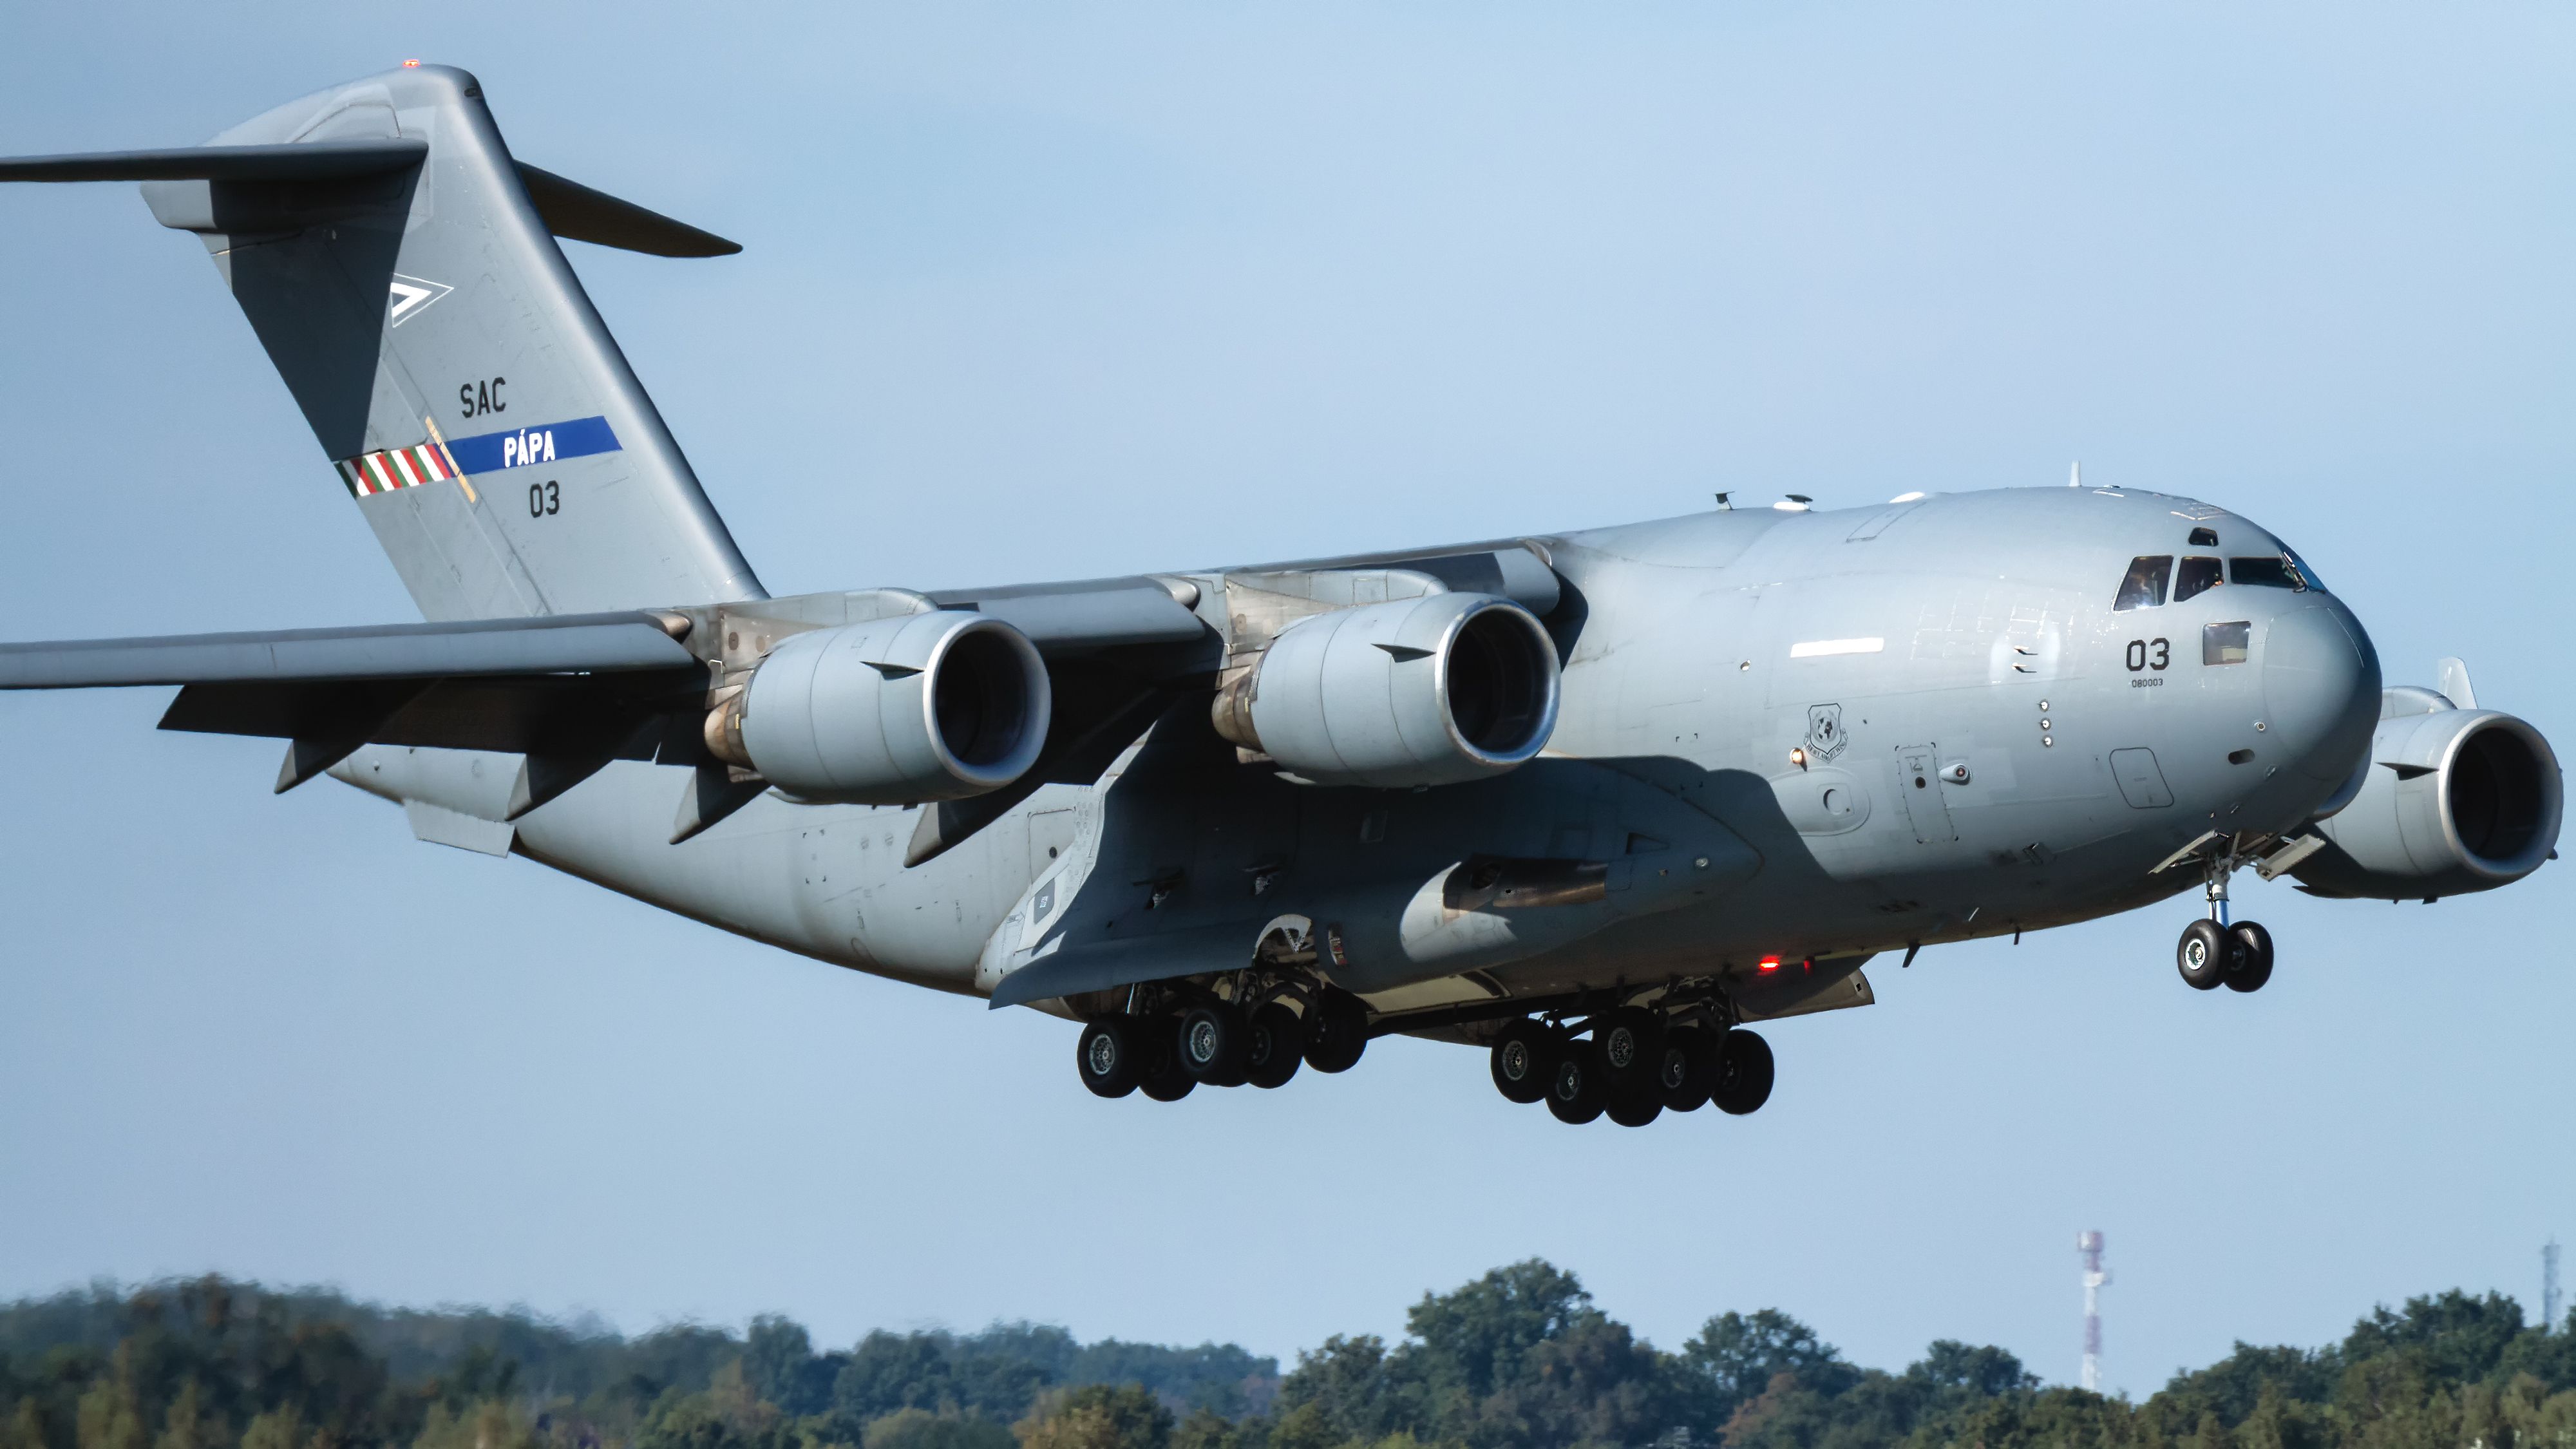 A Boeing C-17 Globemaster III Flying Close To The Ground.